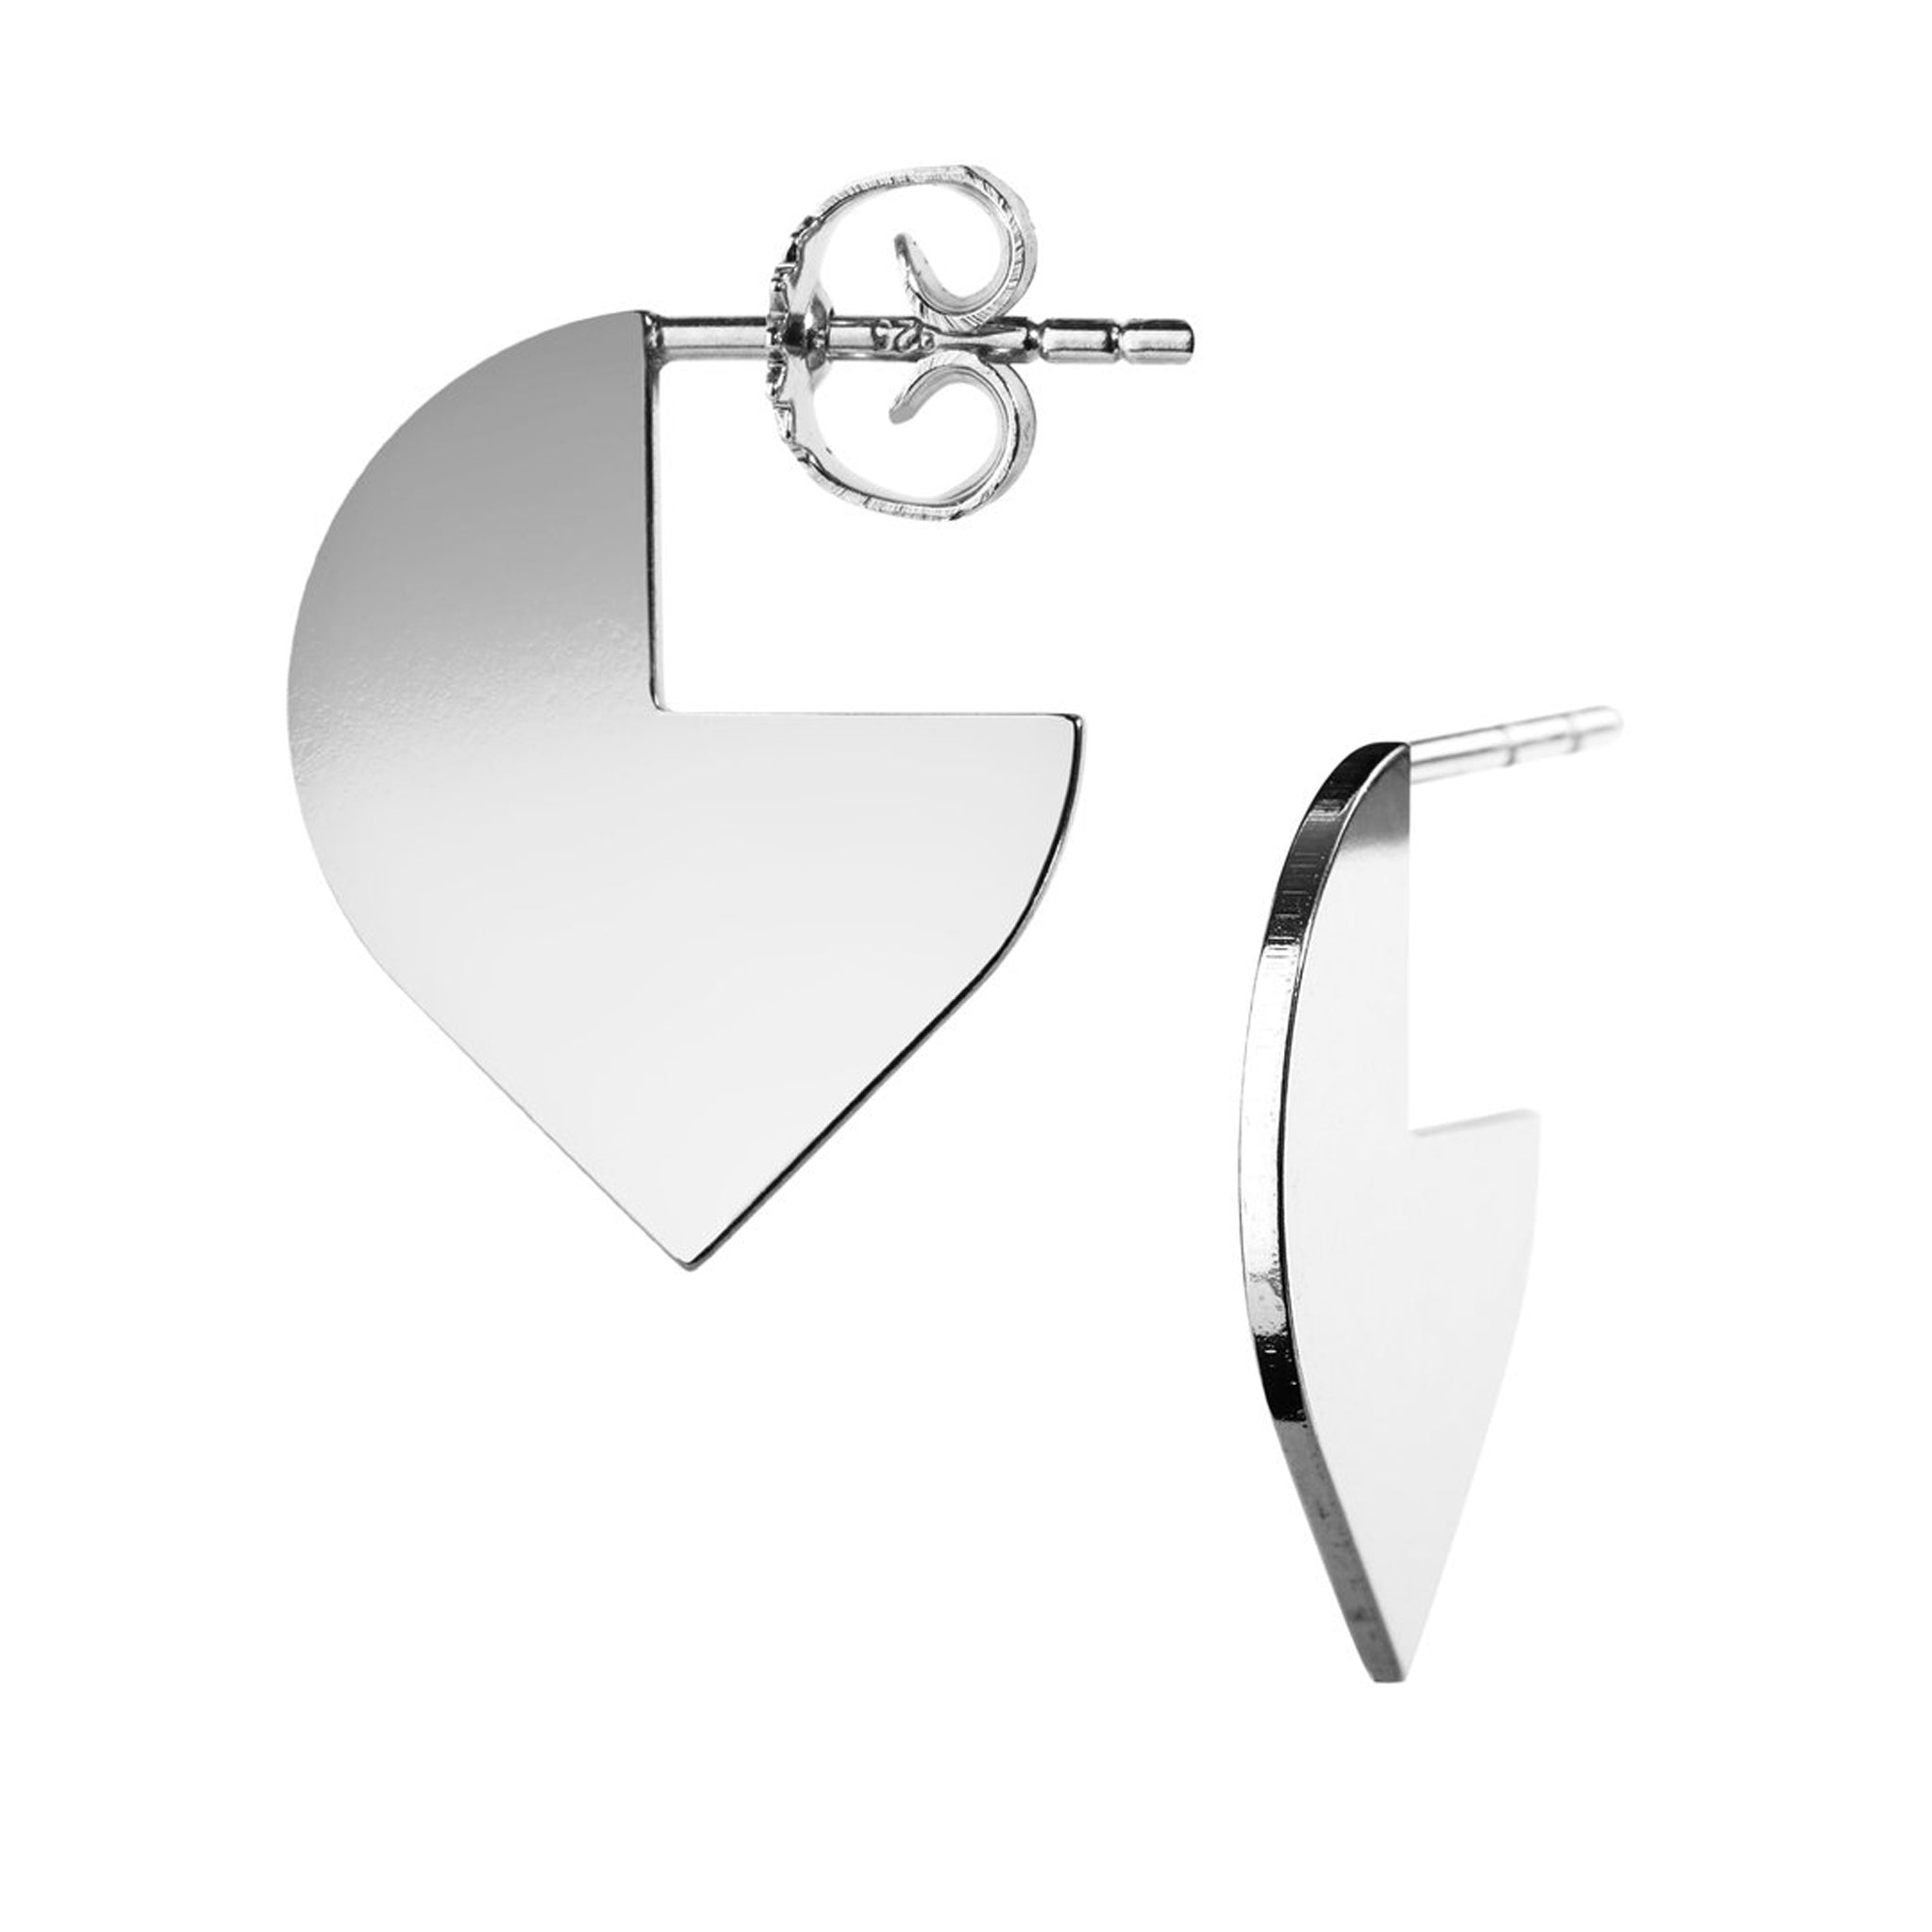 A pair of Large Cut Hoop - Silver earrings from Scherning with a heart shape.